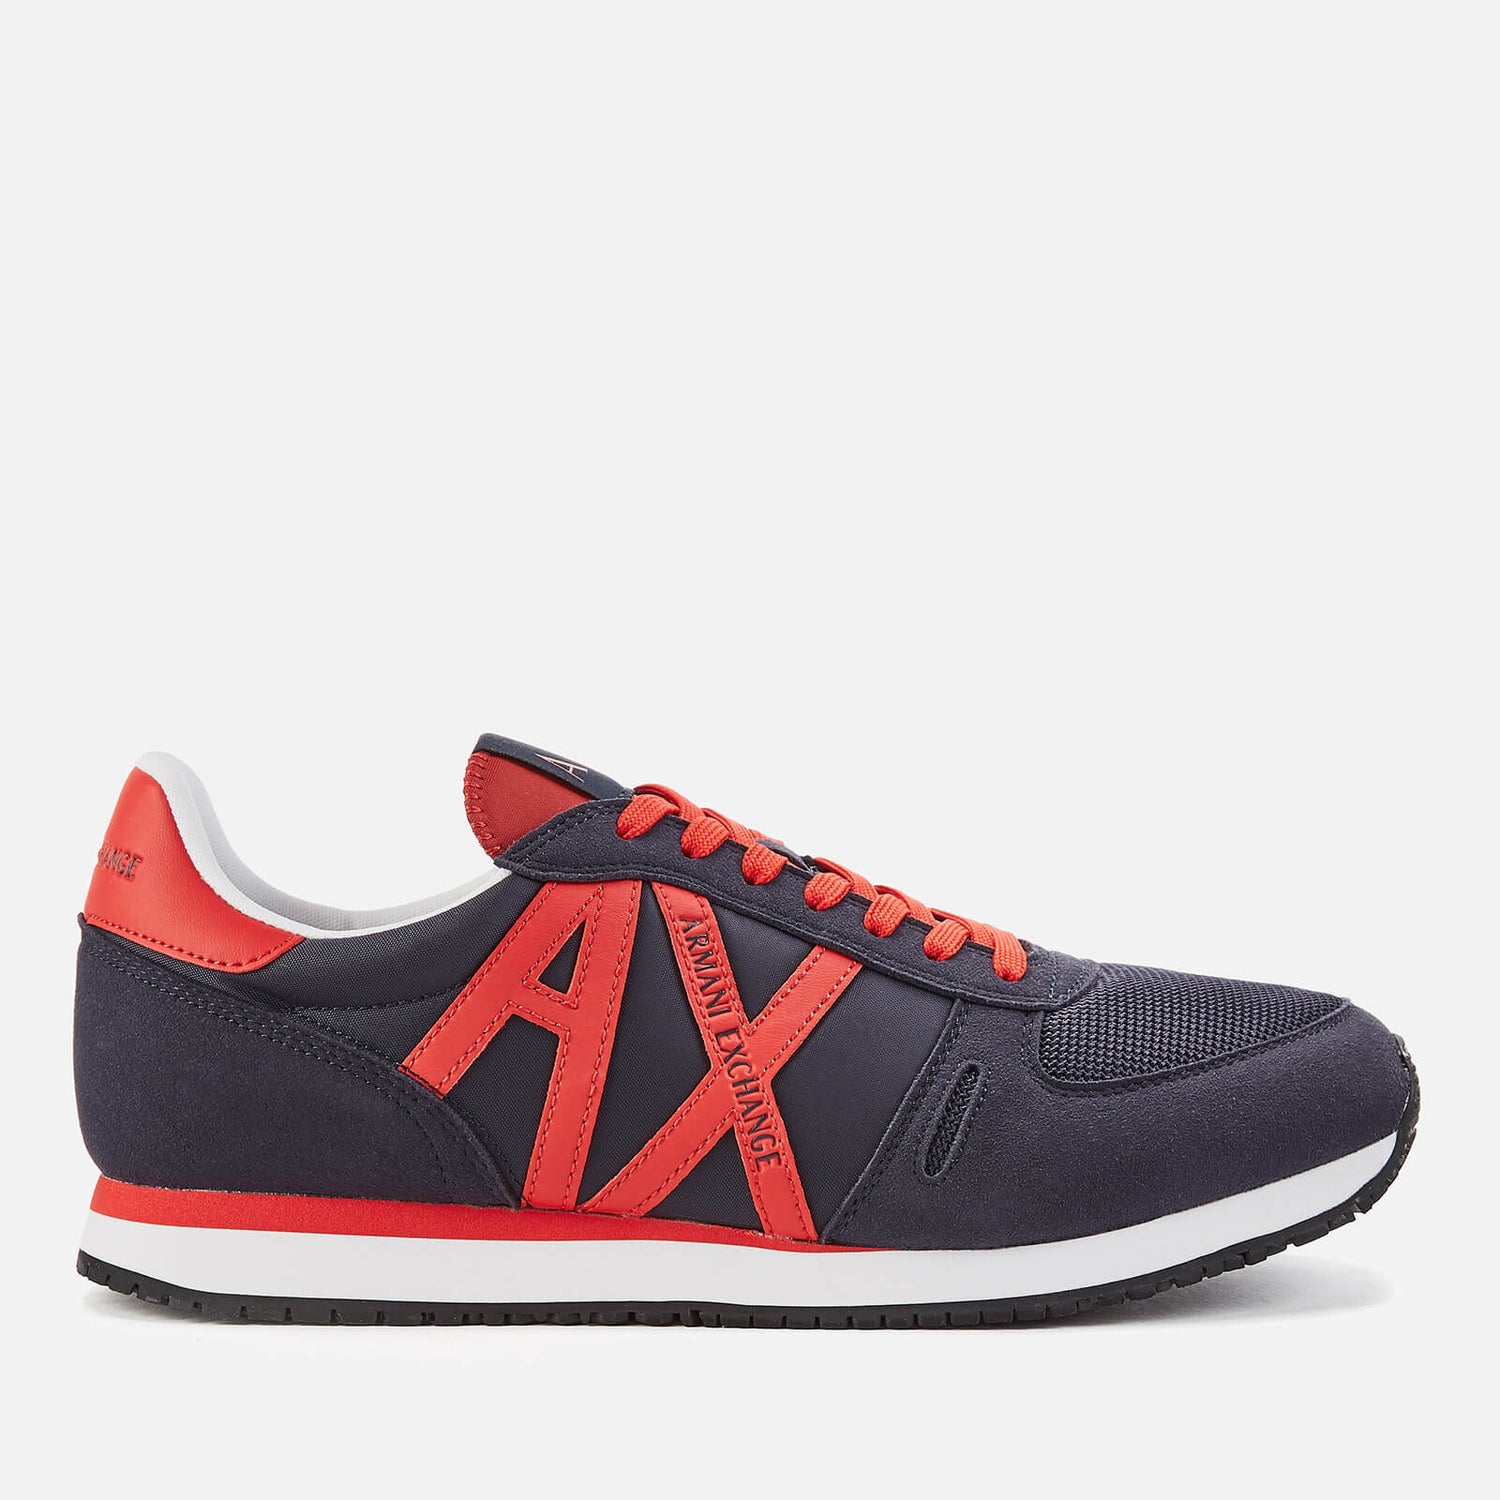 Armani Exchange Men's AX Logo Runner Style Trainers - Navy/Red | FREE ...